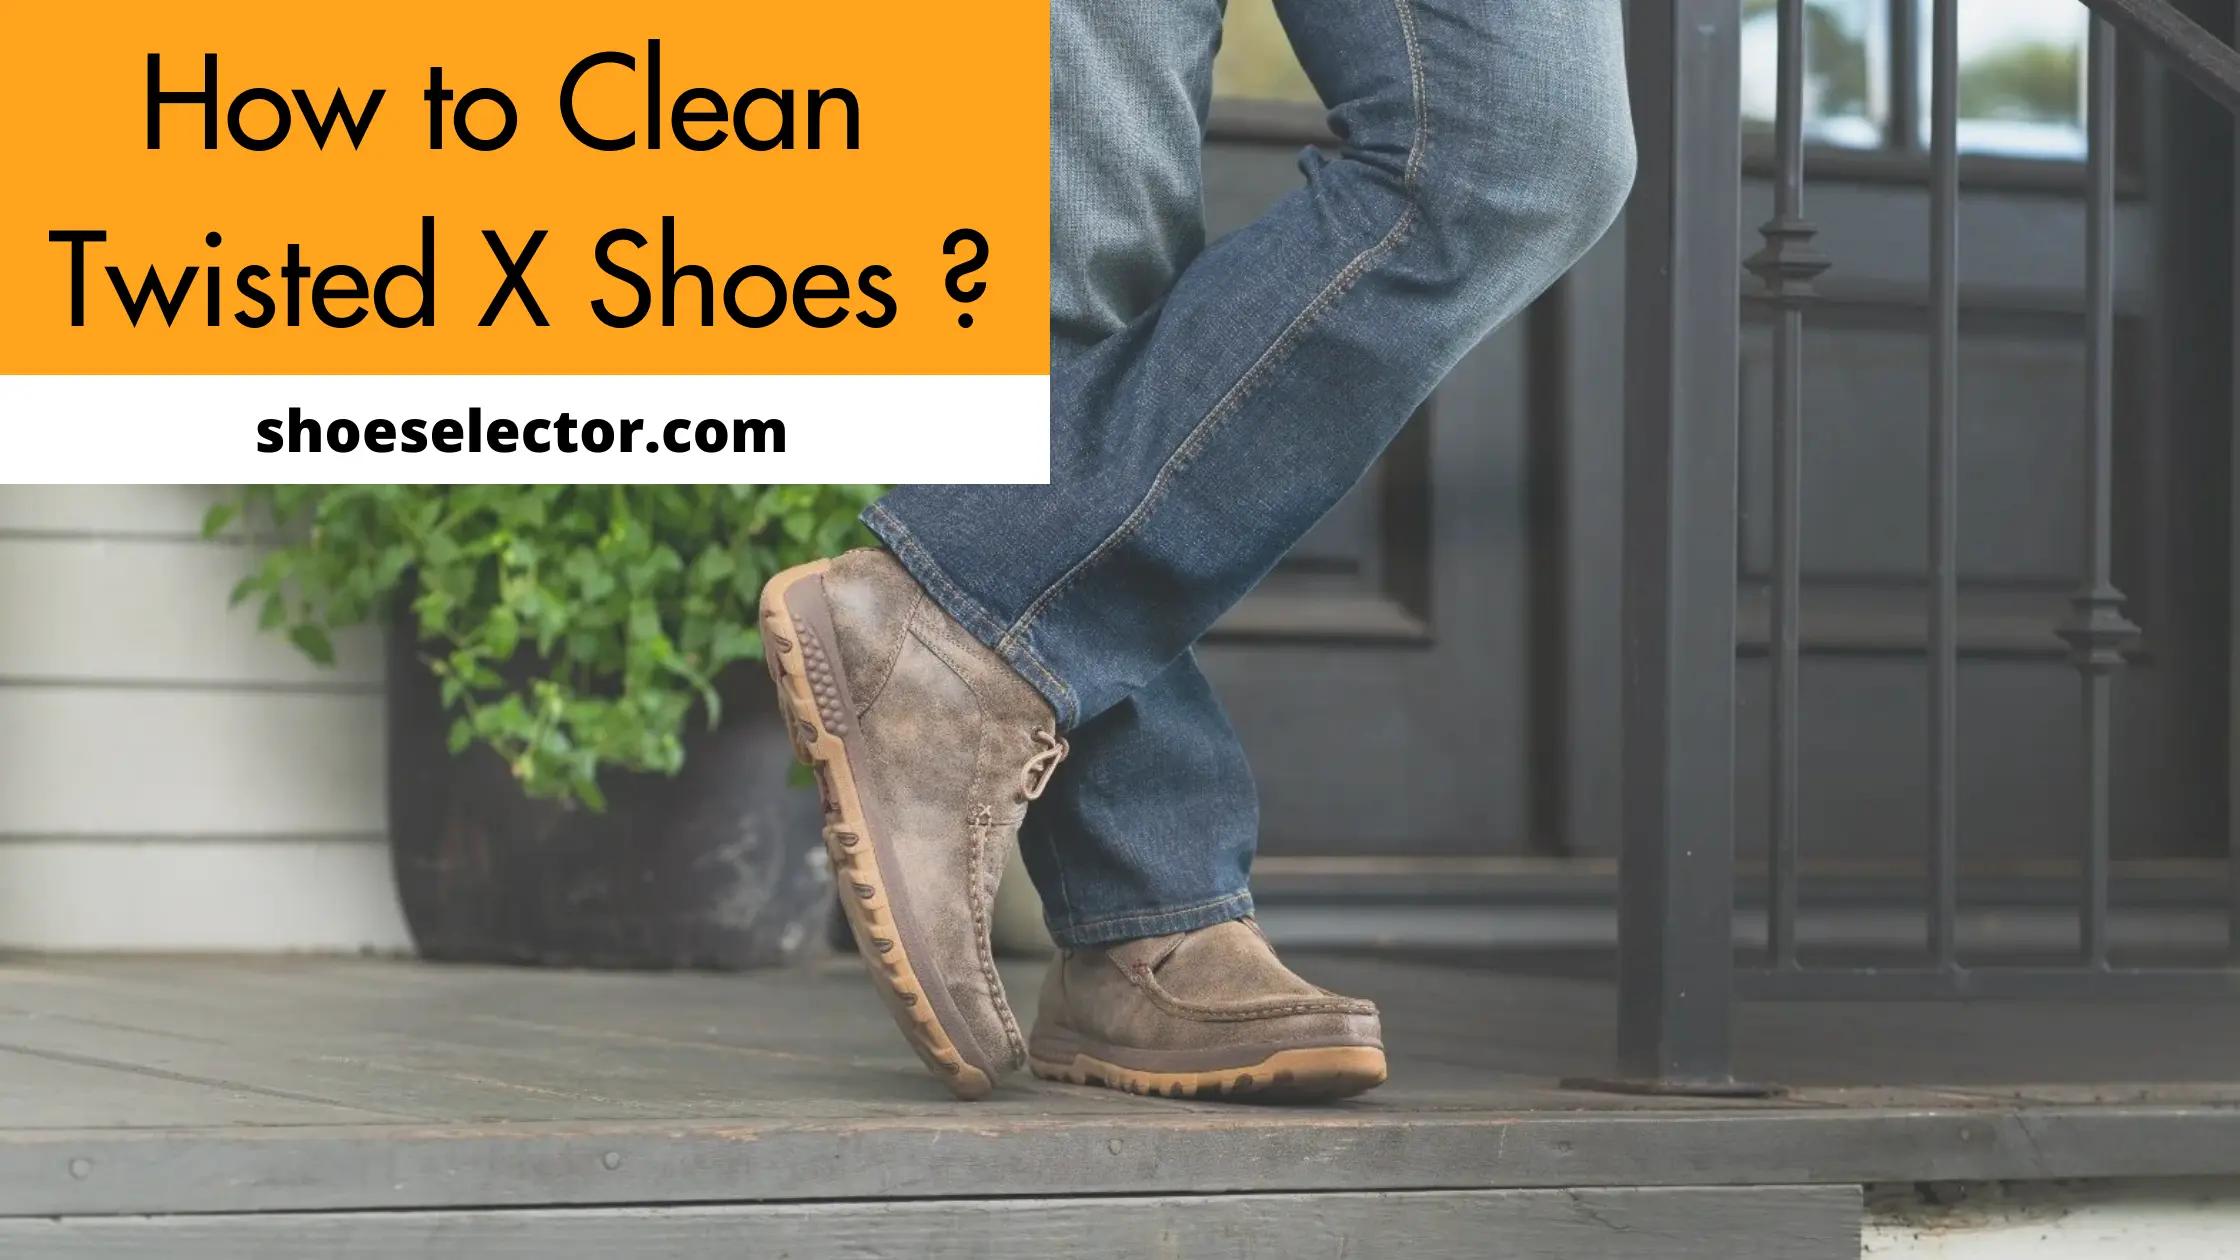 How to Clean Twisted x Shoes? - Quick Guide